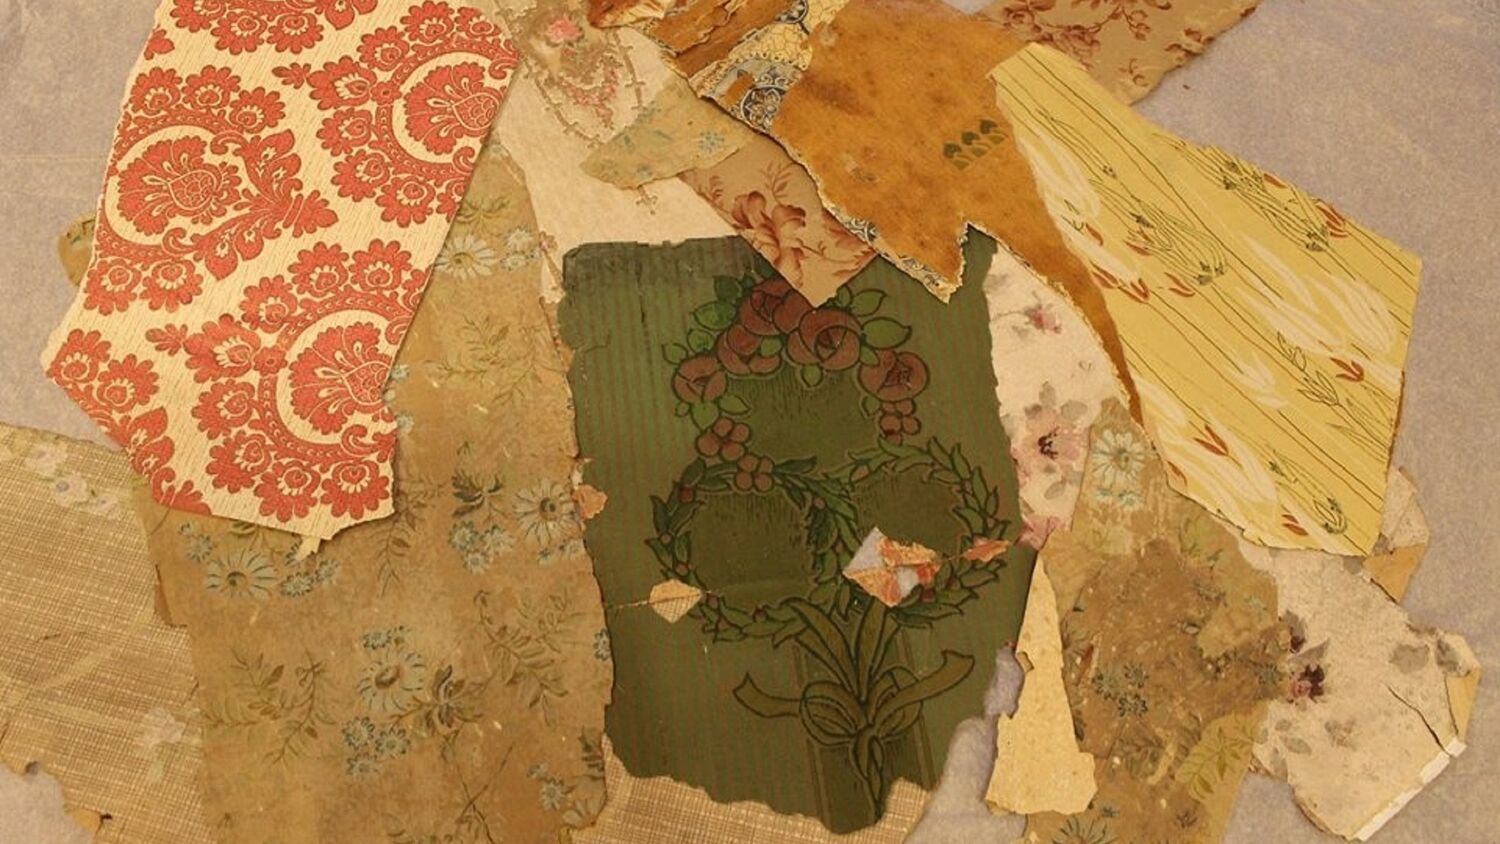 Scraps of old wallpaper are laid upon a table. Most have some sort of floral pattern and are a deep red or dark green in colour.